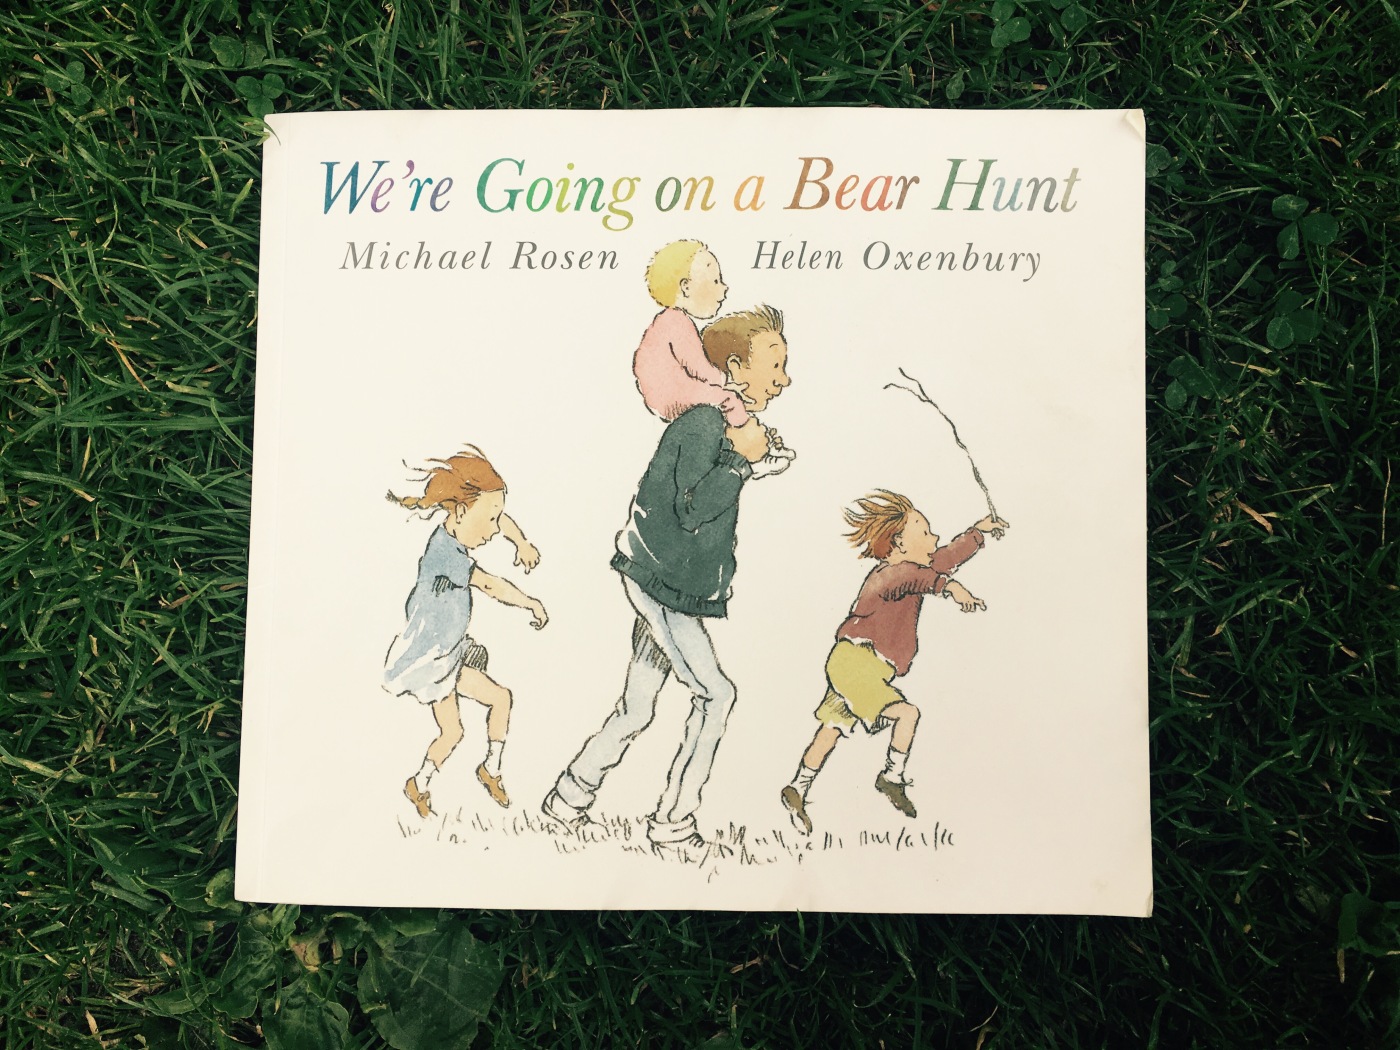 We're Going On A Bear Hunt by Michael Rosen and Helen Oxenbury